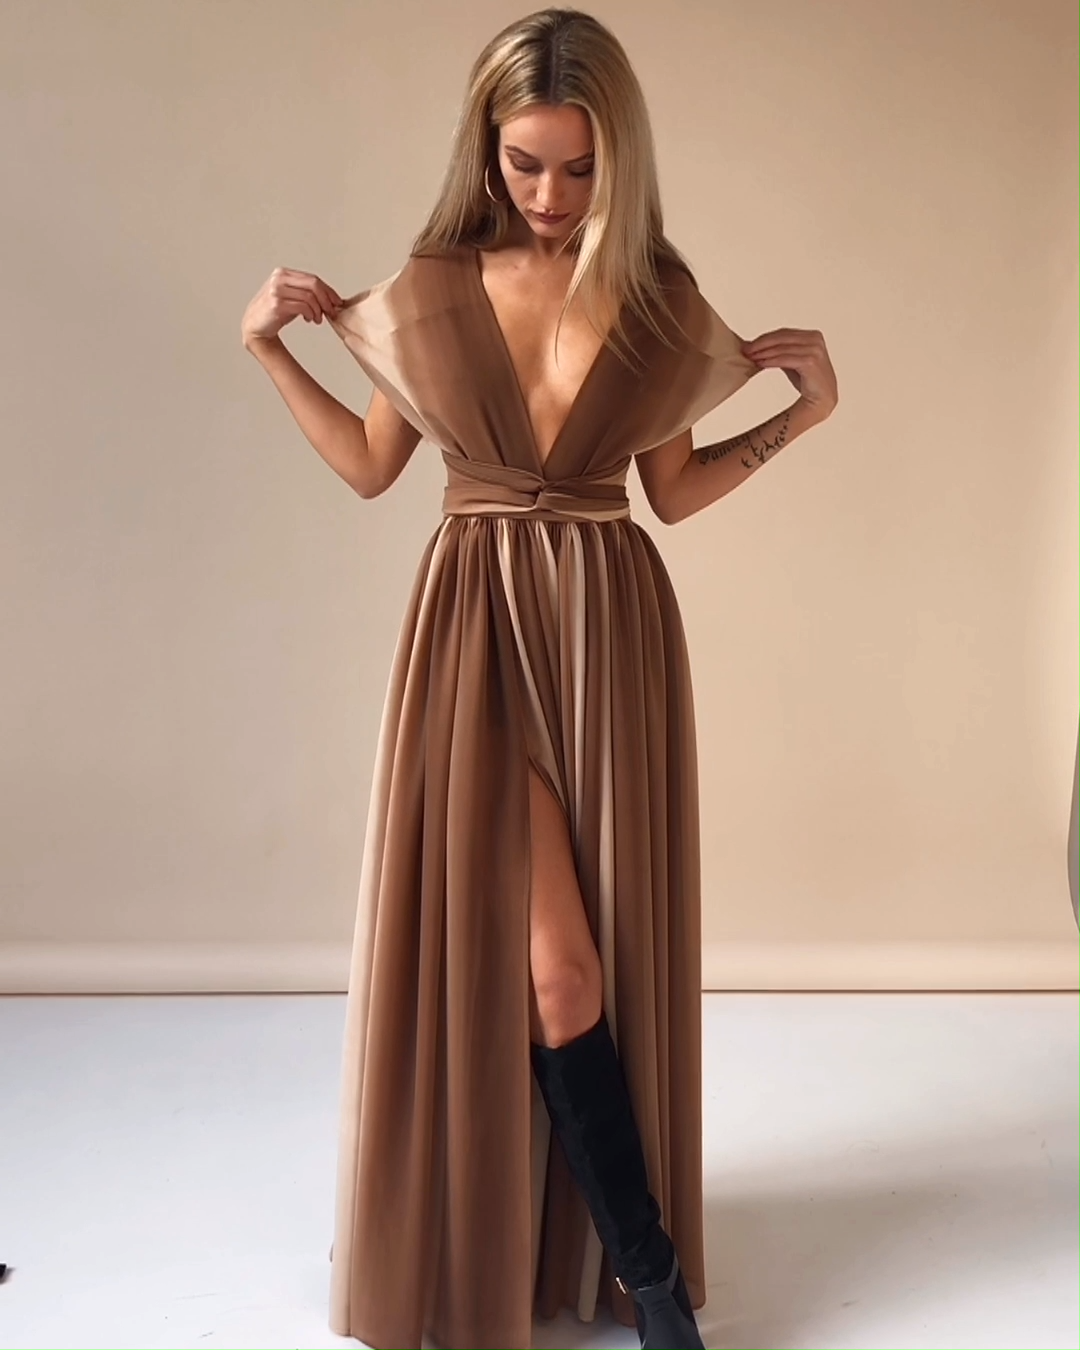 Sexy dress, how to wear convertible/infinity dress? How to create your style? -   14 dress Graduation guest ideas